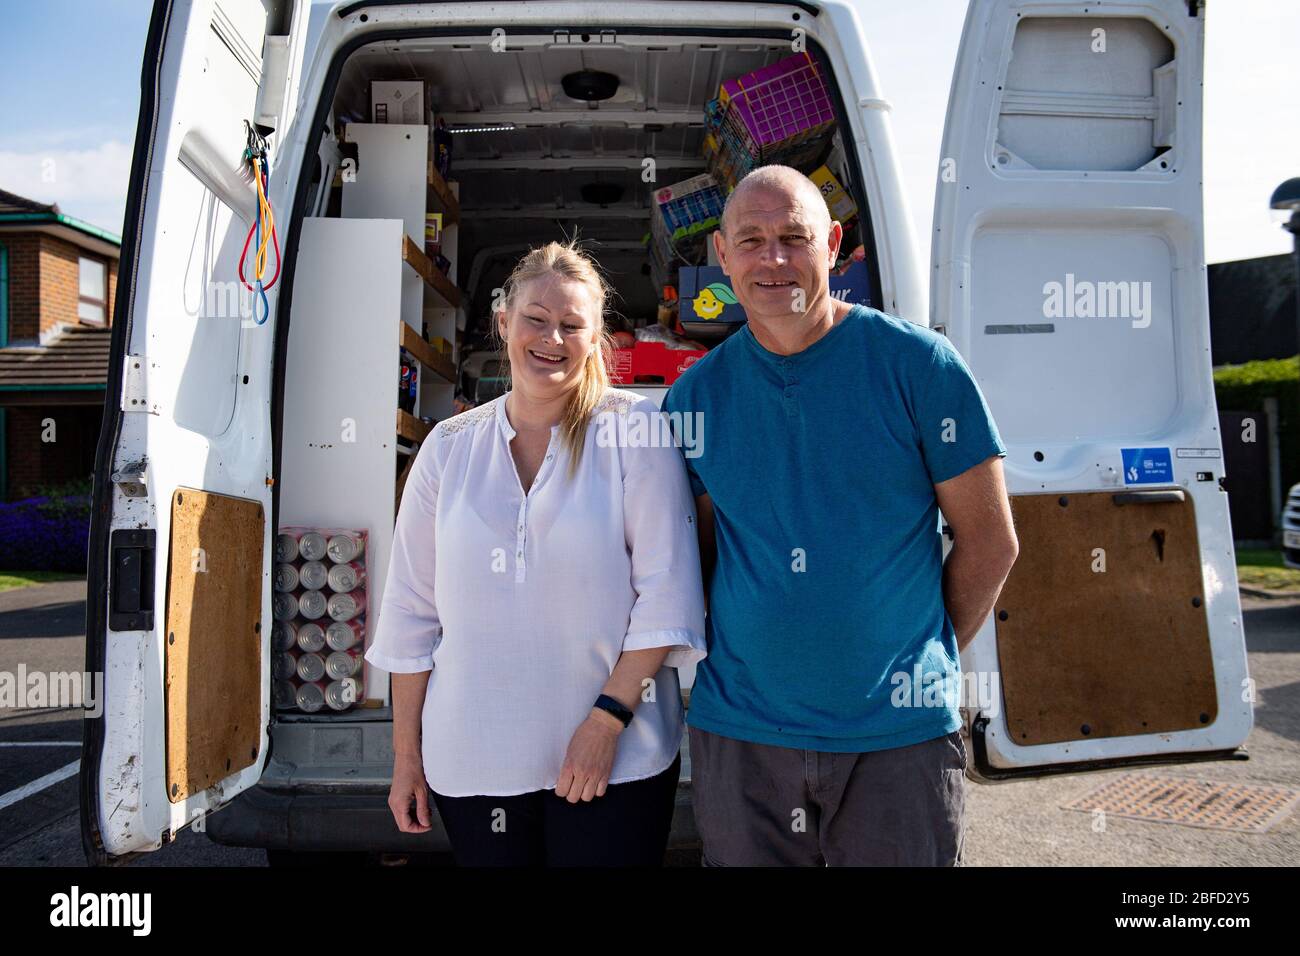 Toni Marshall and her partner Ian Peat have introduced a mobile shop in Nottingham, bringing groceries to vulnerable and elderly customers who don't want to stray far from home during the Covid-19 lockdown. Stock Photo